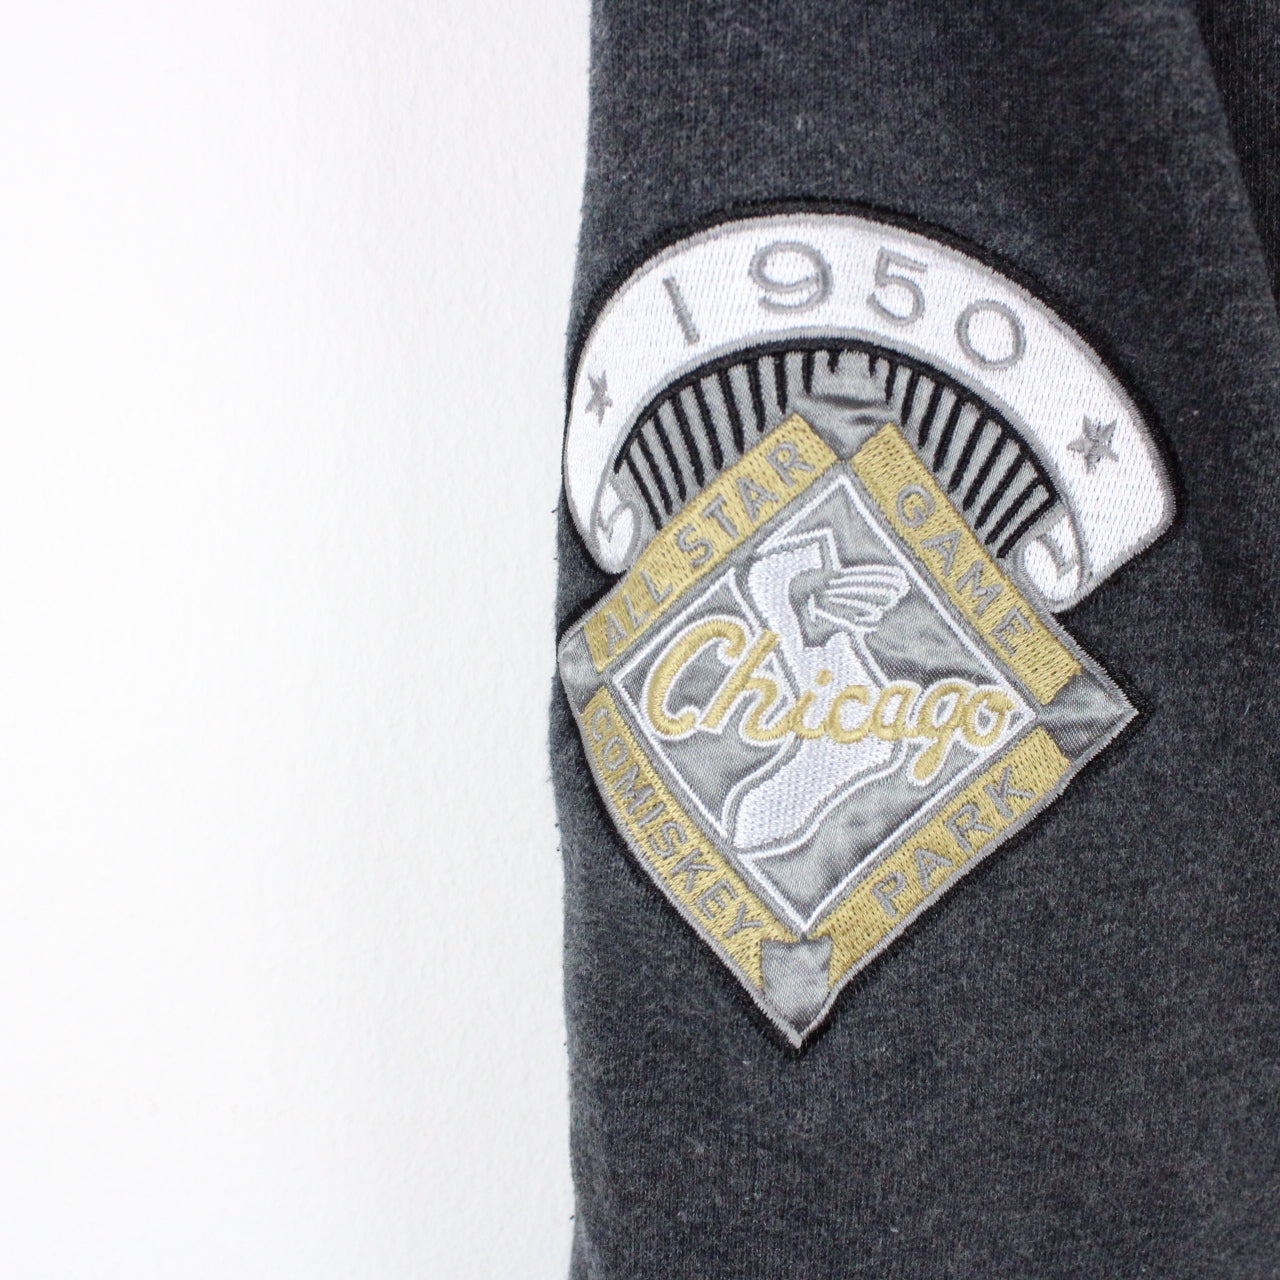 MAJESTIC Chicago WHITE SOX Hoodie | XS